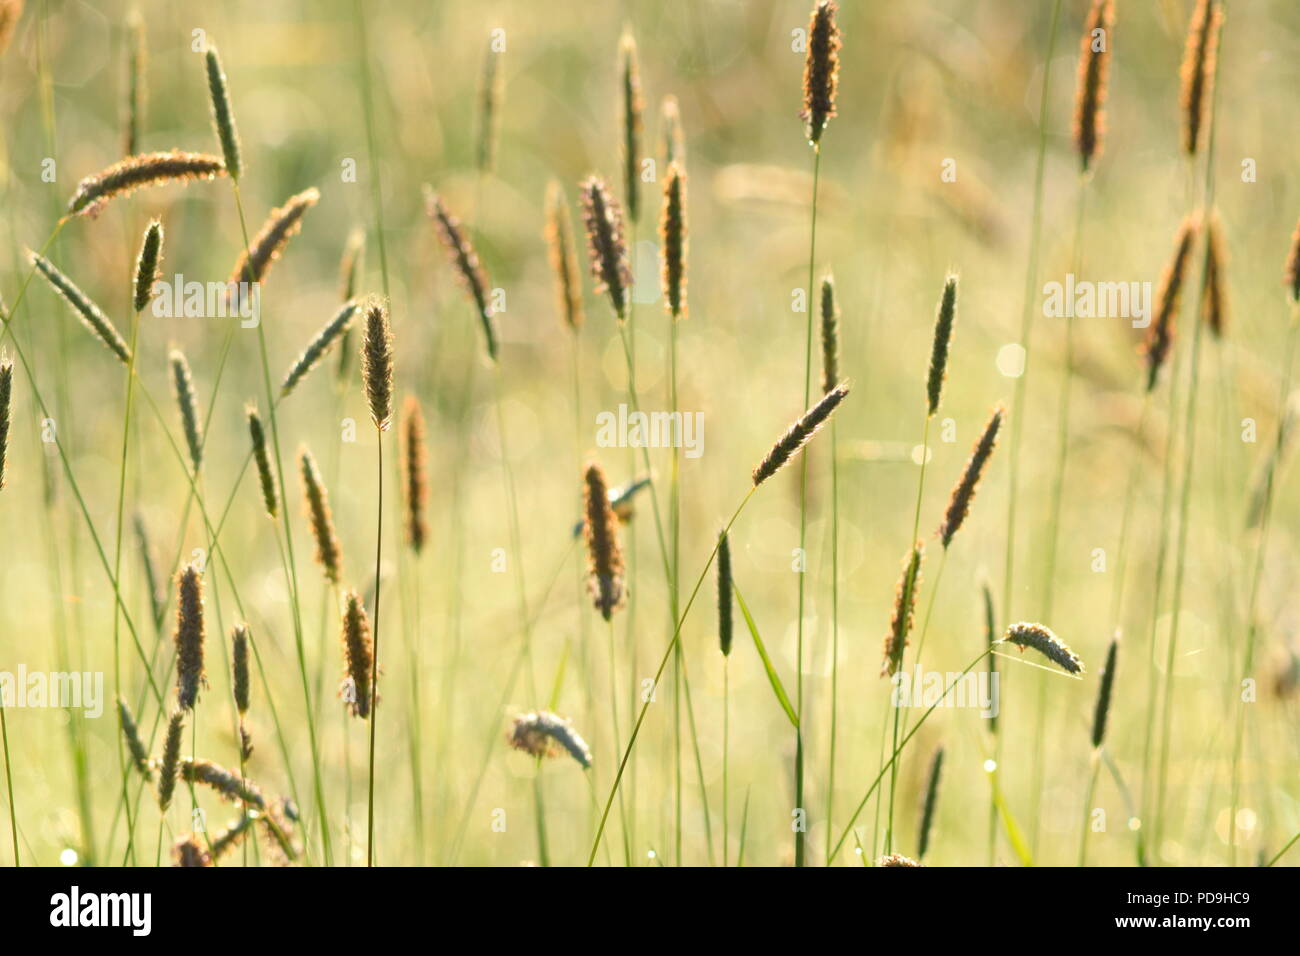 Blurred flower heads of grasses as background Stock Photo